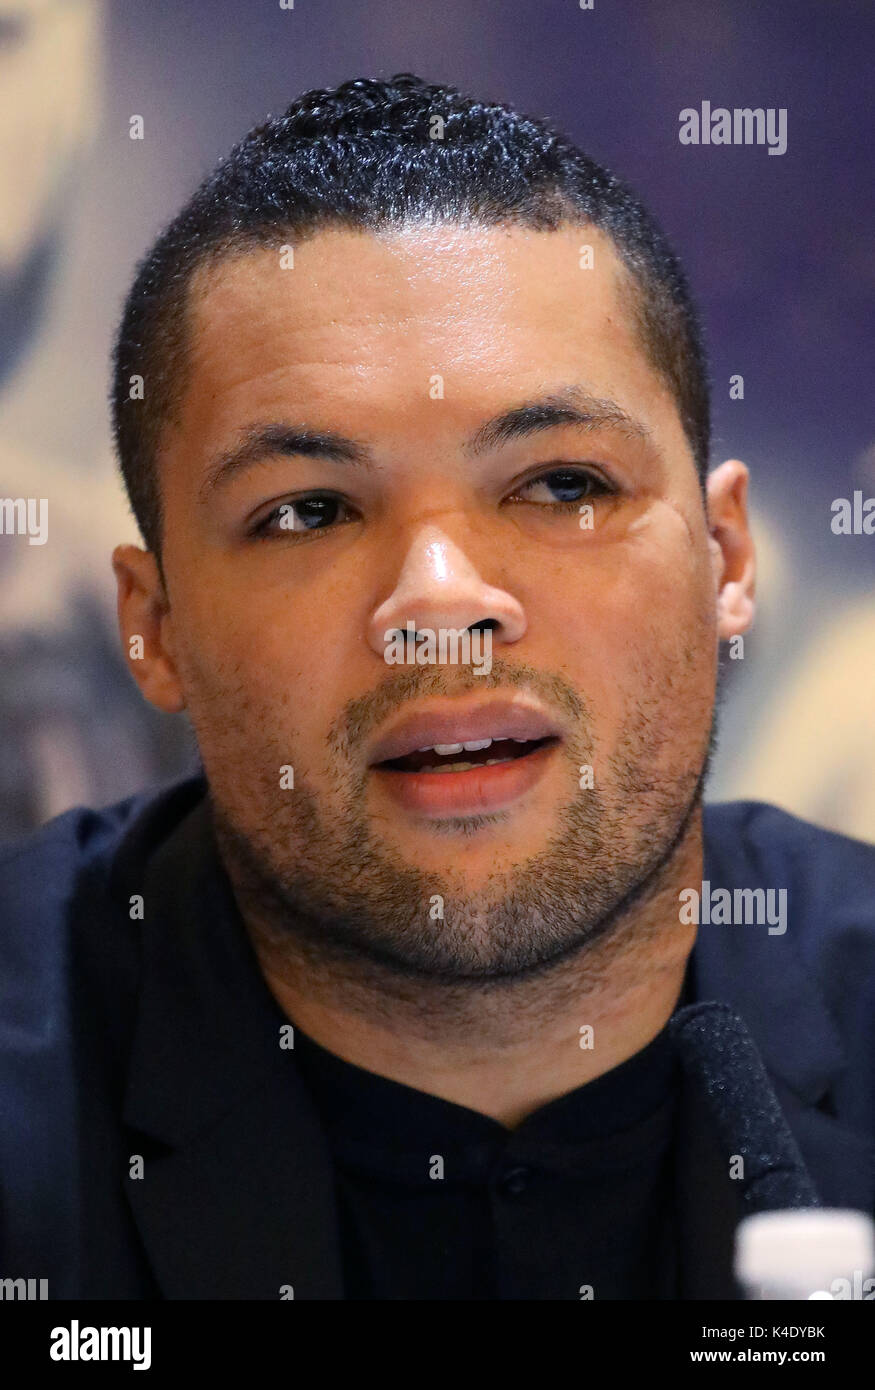 Joe Joyce speaking during the press conference at the Park Plaza Riverbank, London. PRESS ASSOCIATION Photo. Picture date: Wednesday September 6, 2017. See PA story BOXING London. Photo credit should read: Phil Toscano/PA Wire Stock Photo